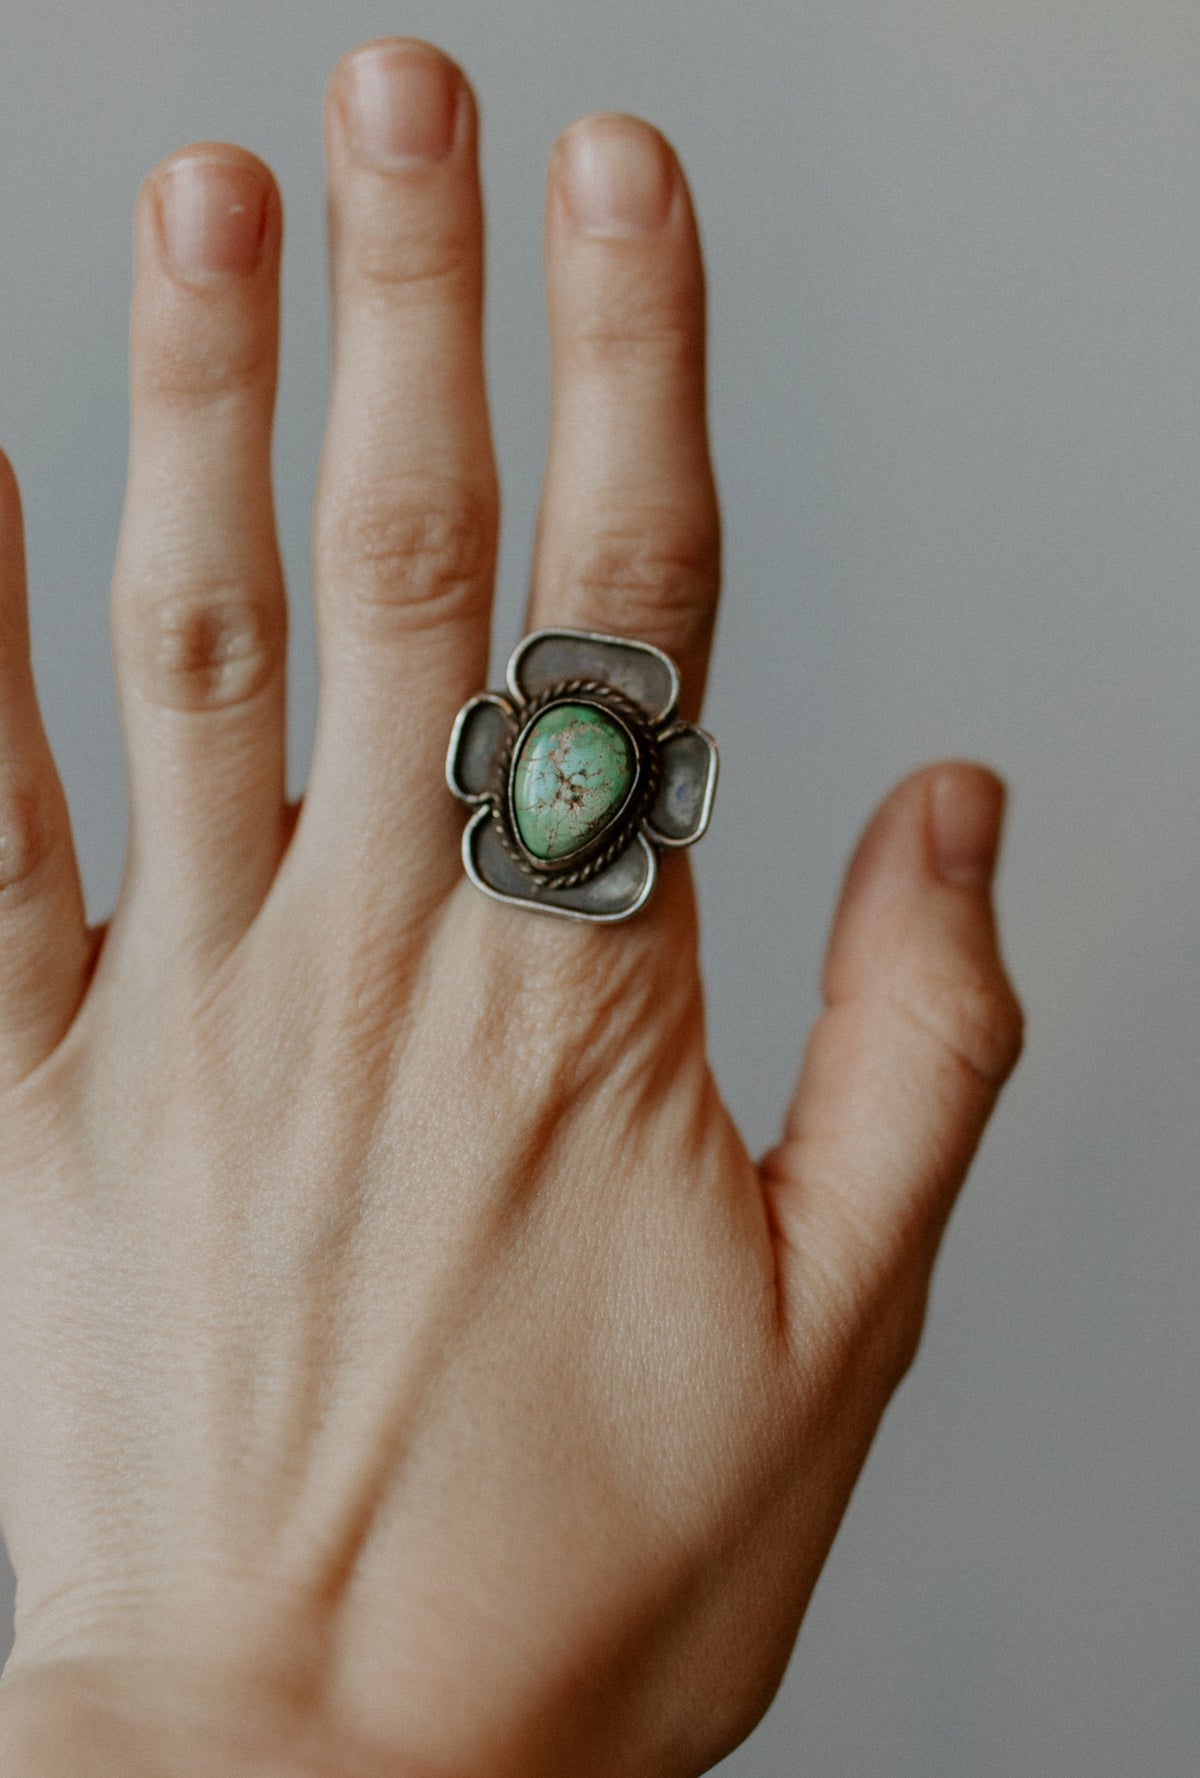 Vintage Turquoise Ring - Size 8.5